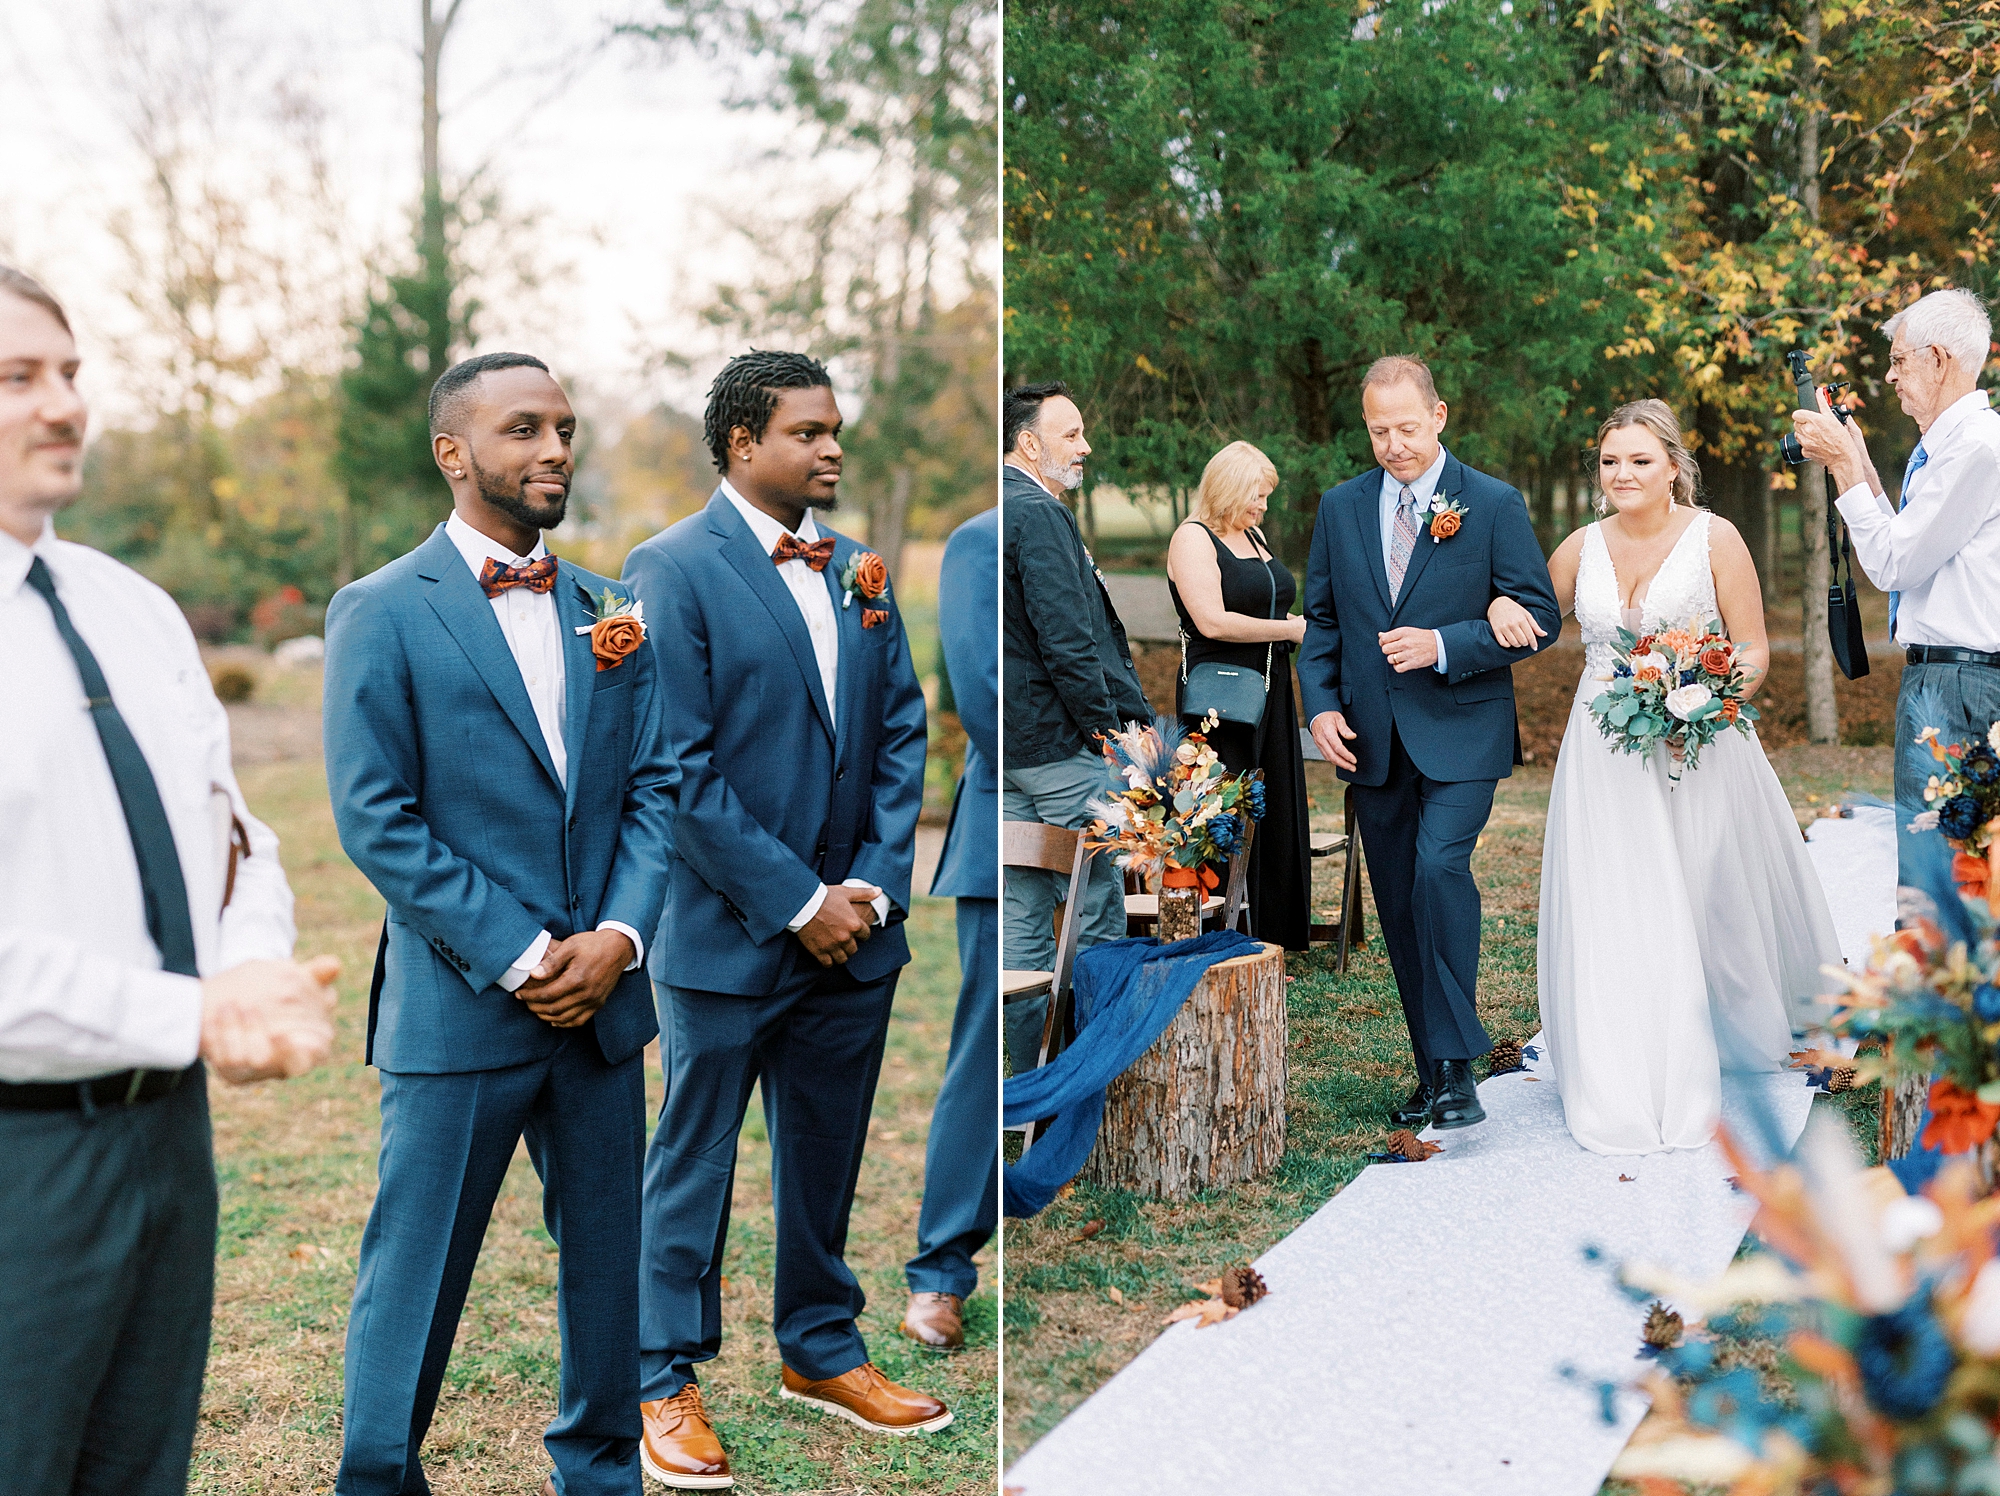 groom smiles watching bride walk up aisle during outdoor wedding ceremony in Indian Trail, NC